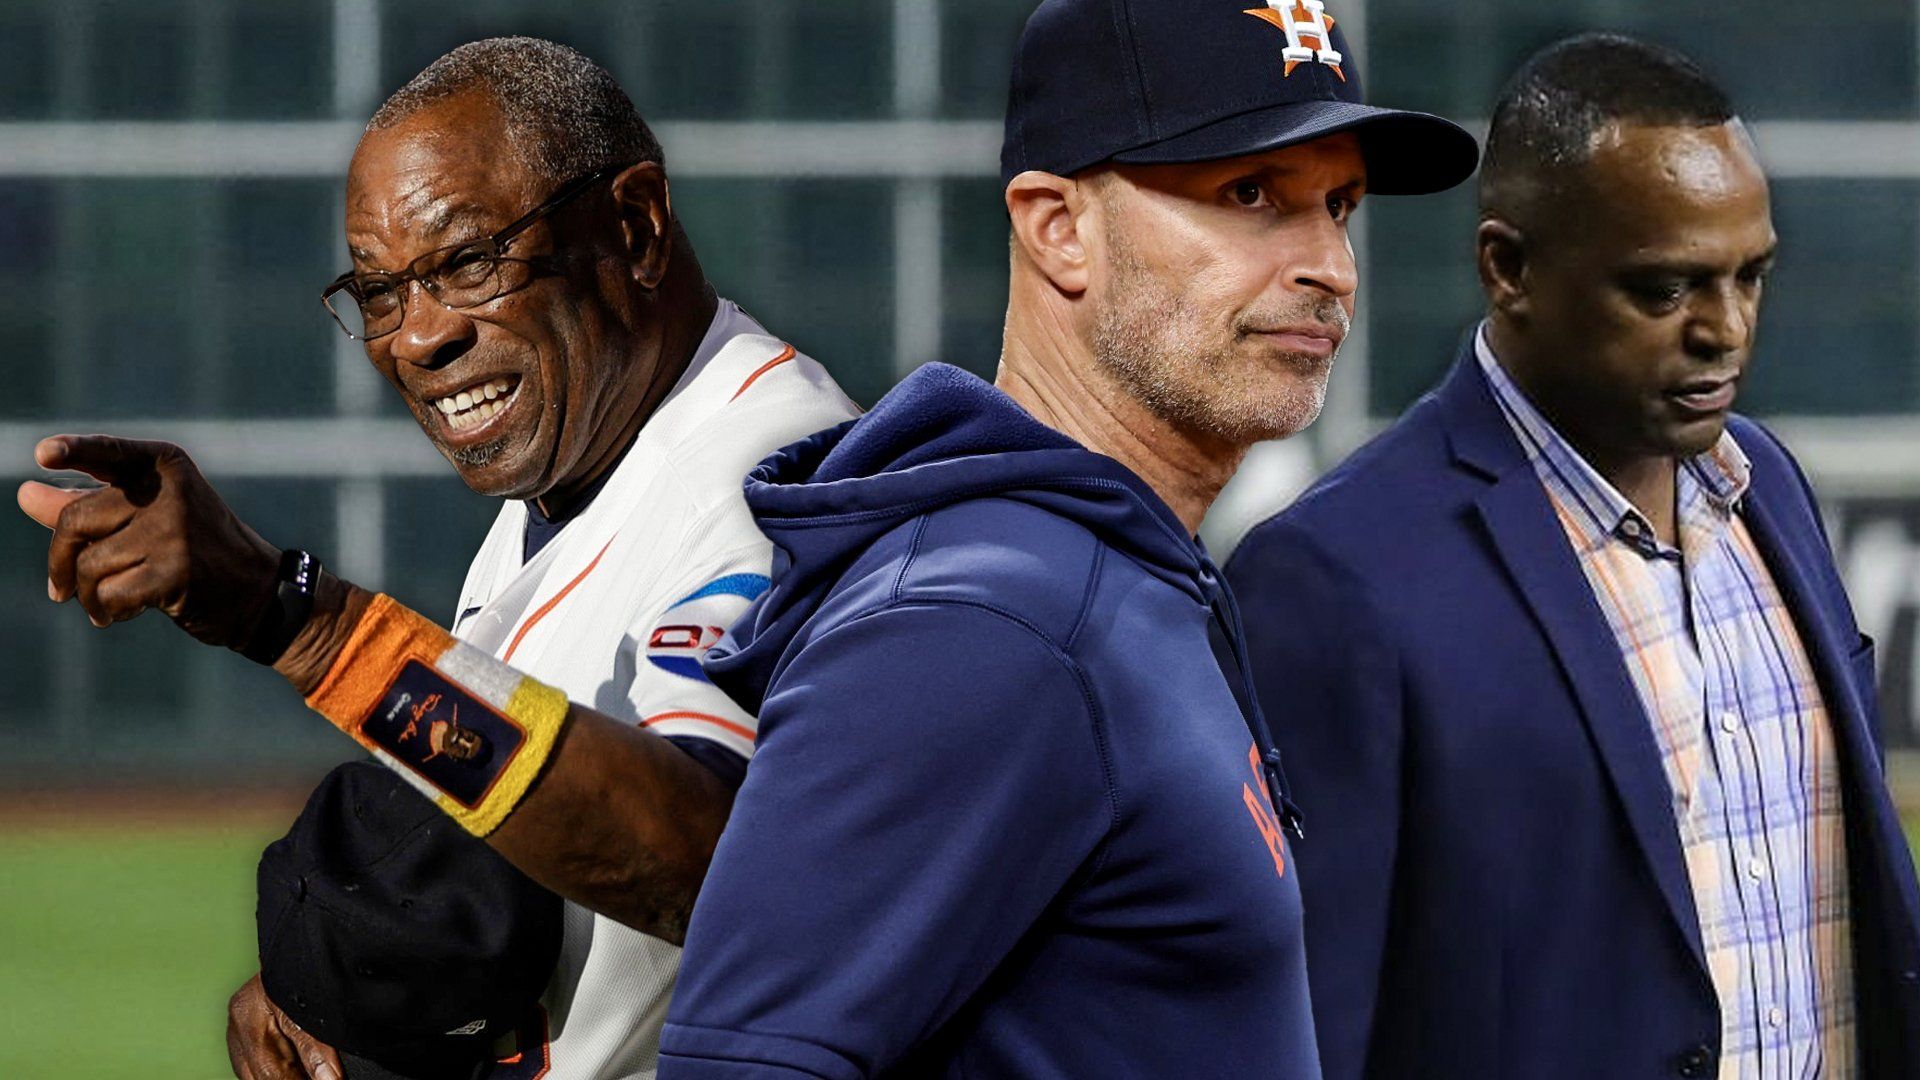 Here’s why Astros aren’t making major moves to “fix” the team